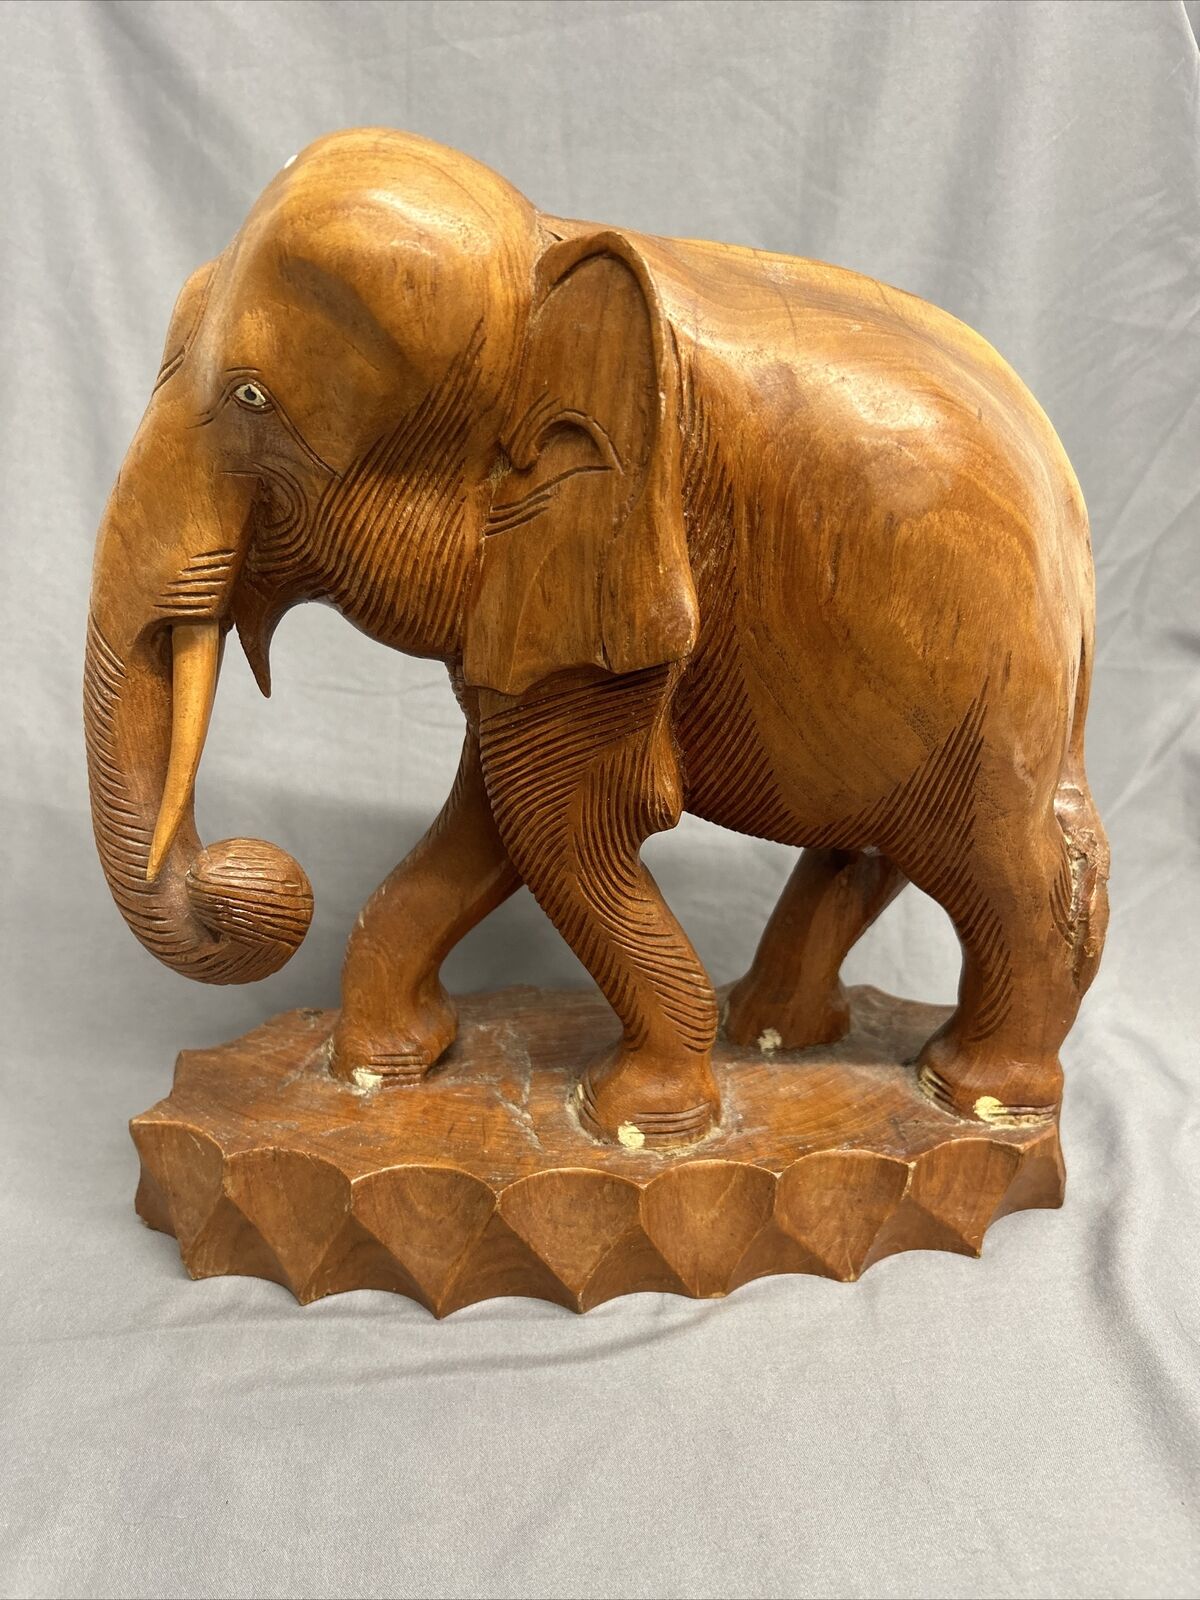 Wooden Elephant Statue 12” Hand Carved SOLID Wood Made In Thailand Animal Thai